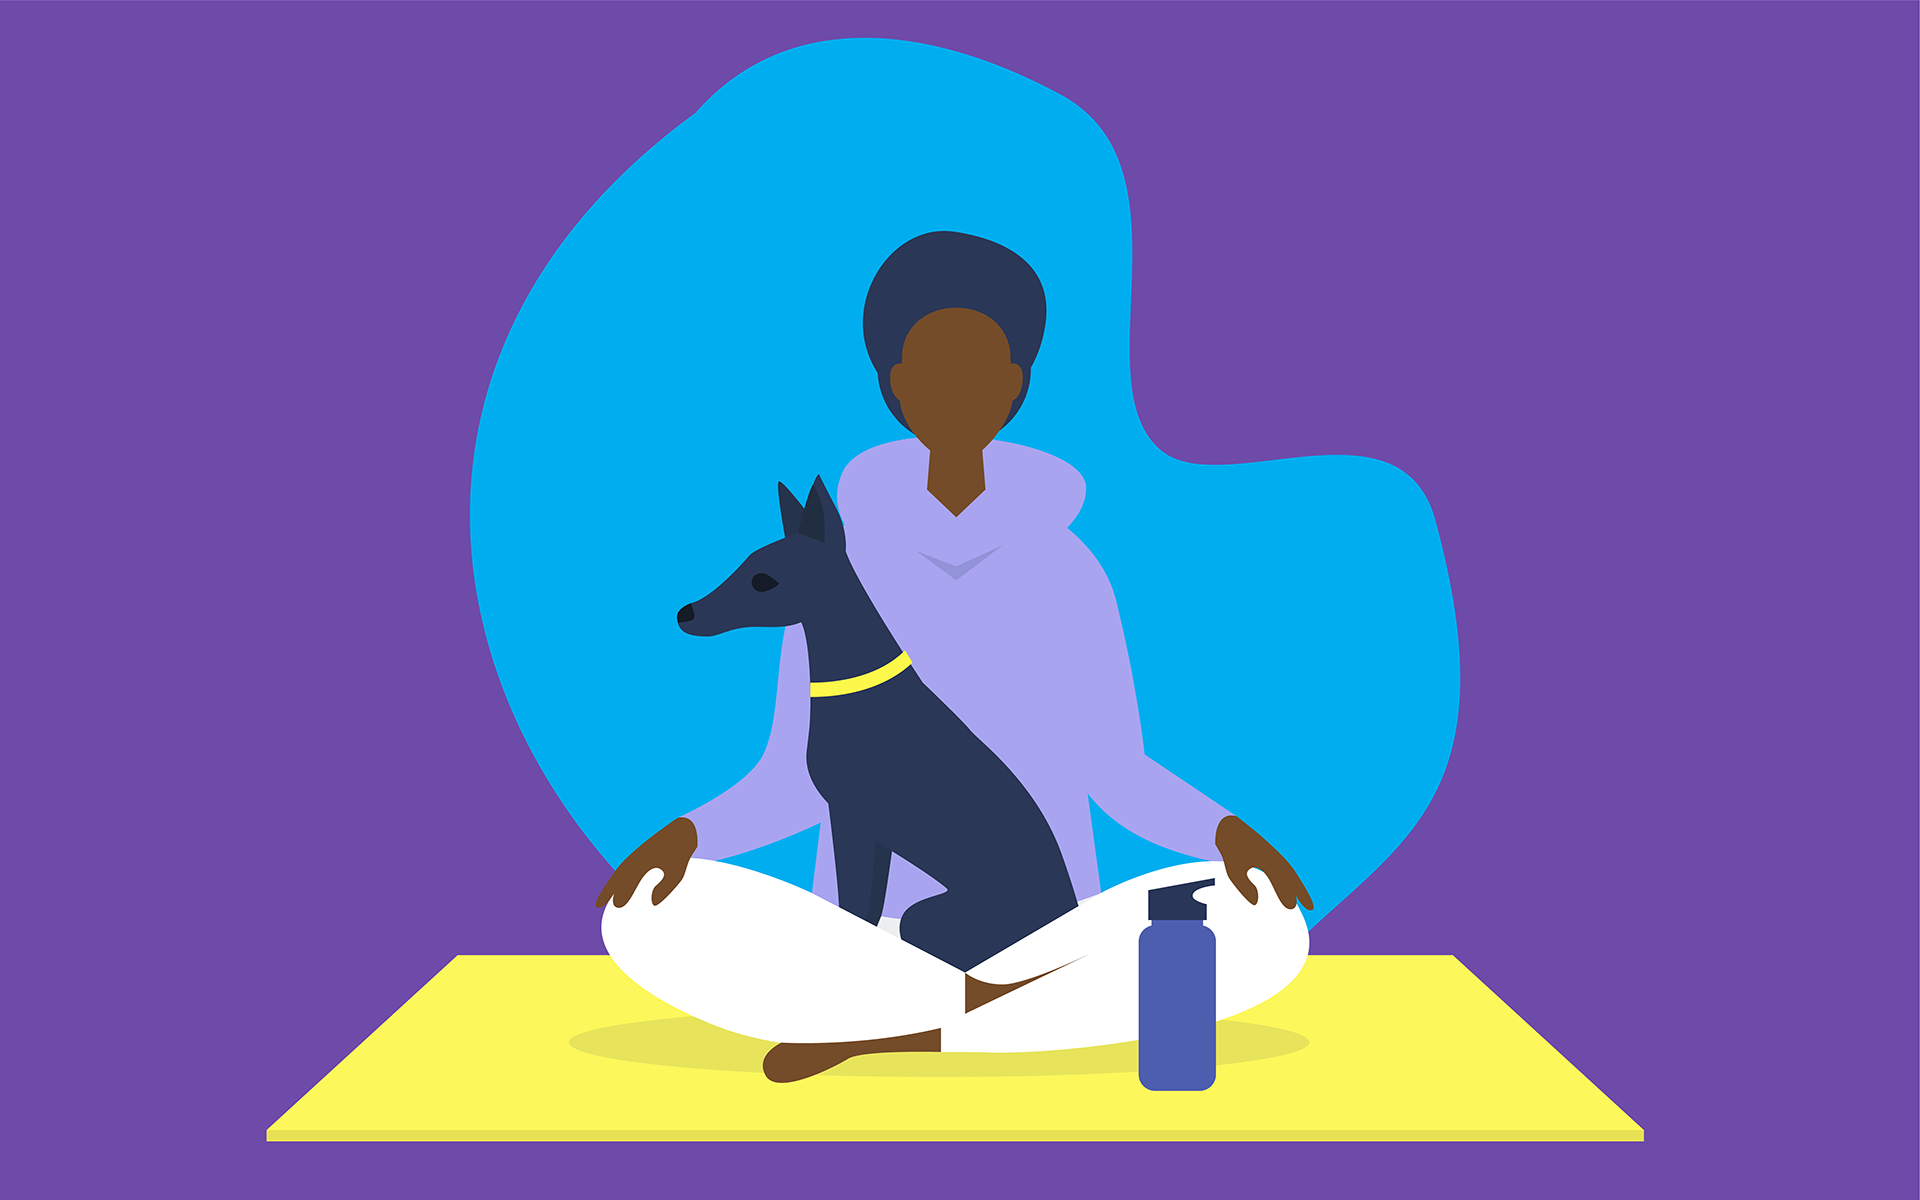 Illustration of a man with light skin and dark hair sitting on a yellow yoga mat cross-legged with a black dog in his lap. The background is purple.